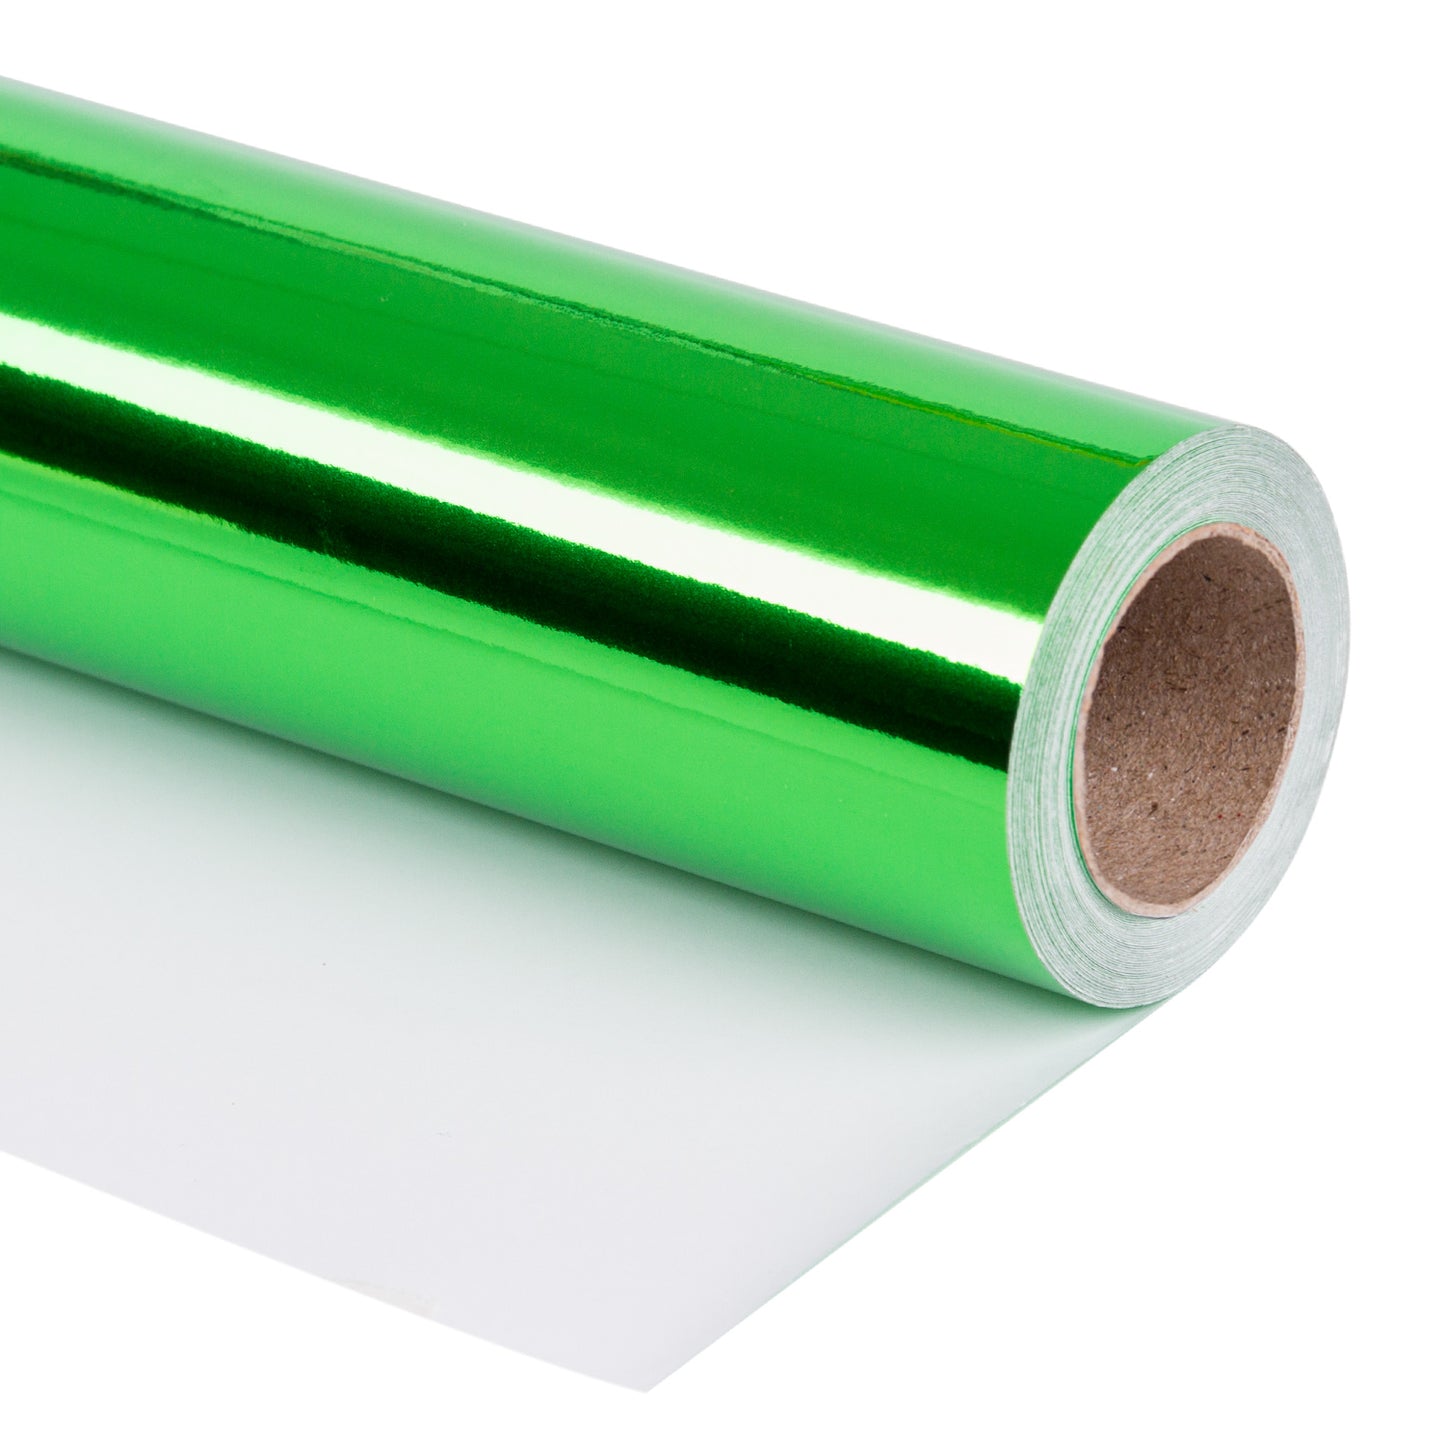 Glossy Metallic Wrapping Paper Roll Green Ream Wholesale Wrapaholic